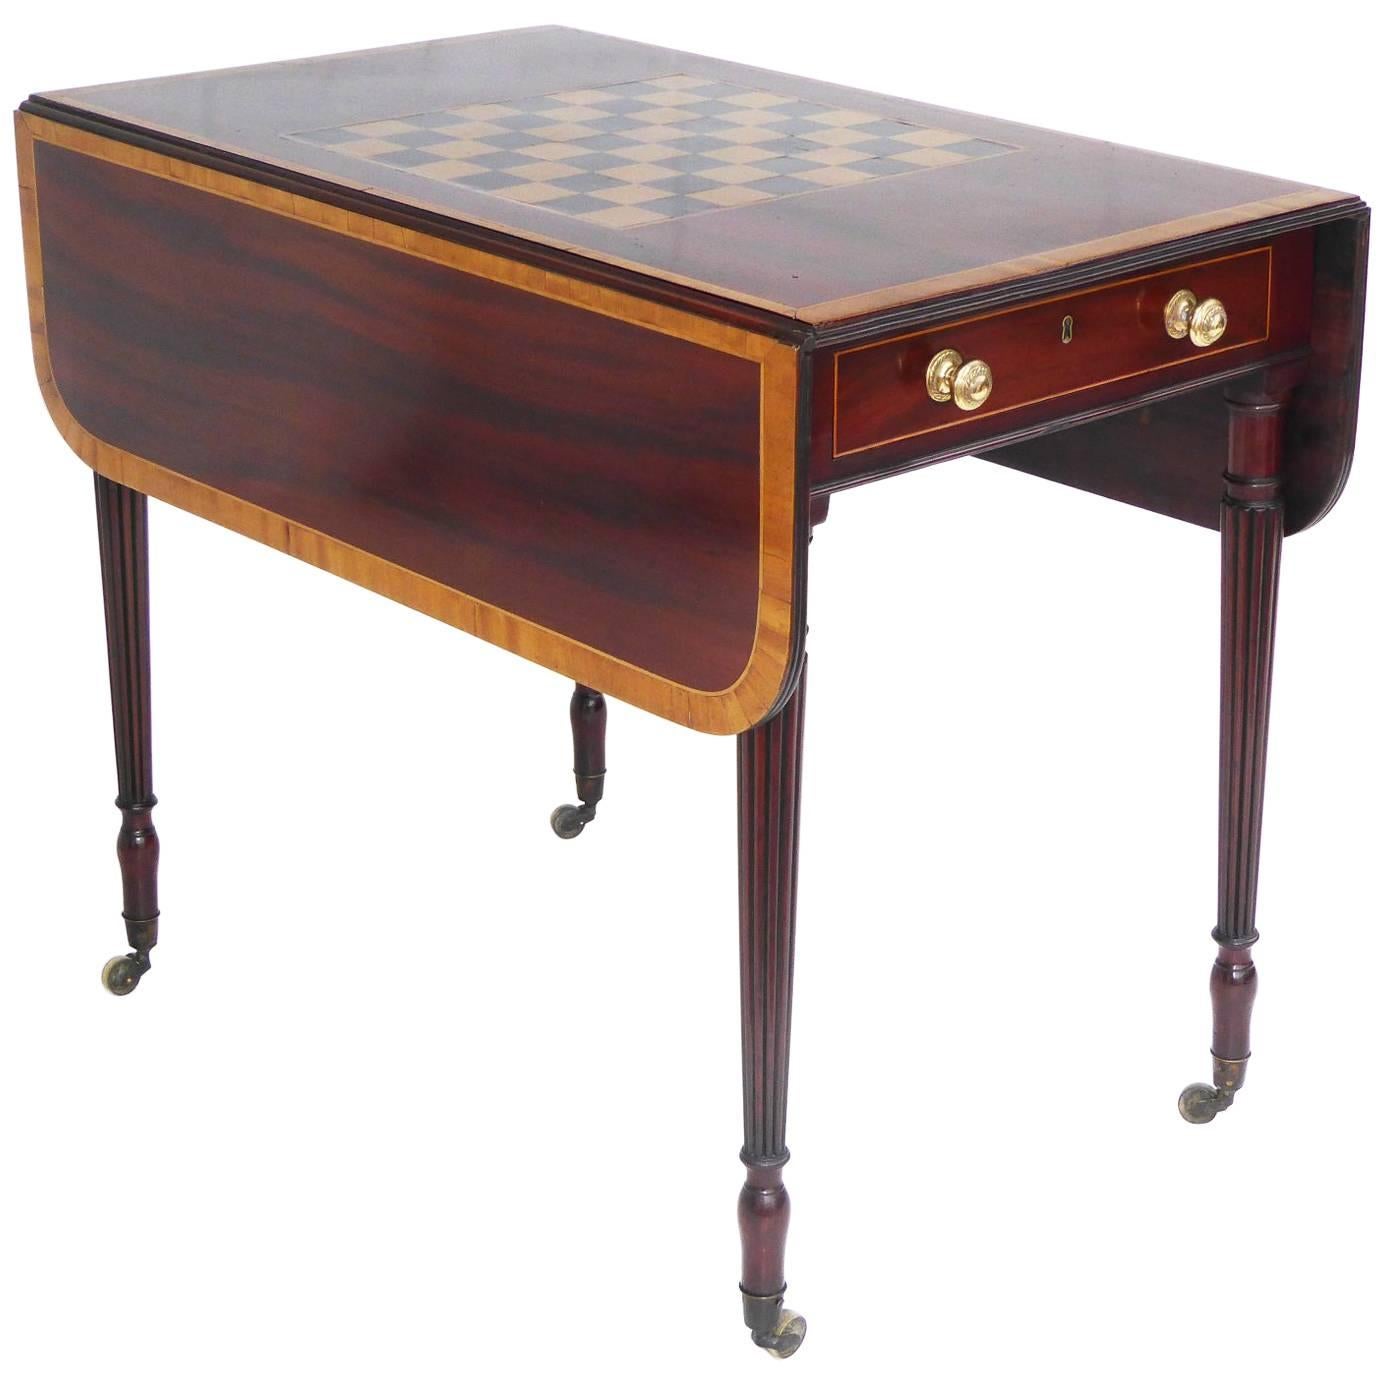 William IV Mahogany and Satinwood Pembroke Table or Games Table